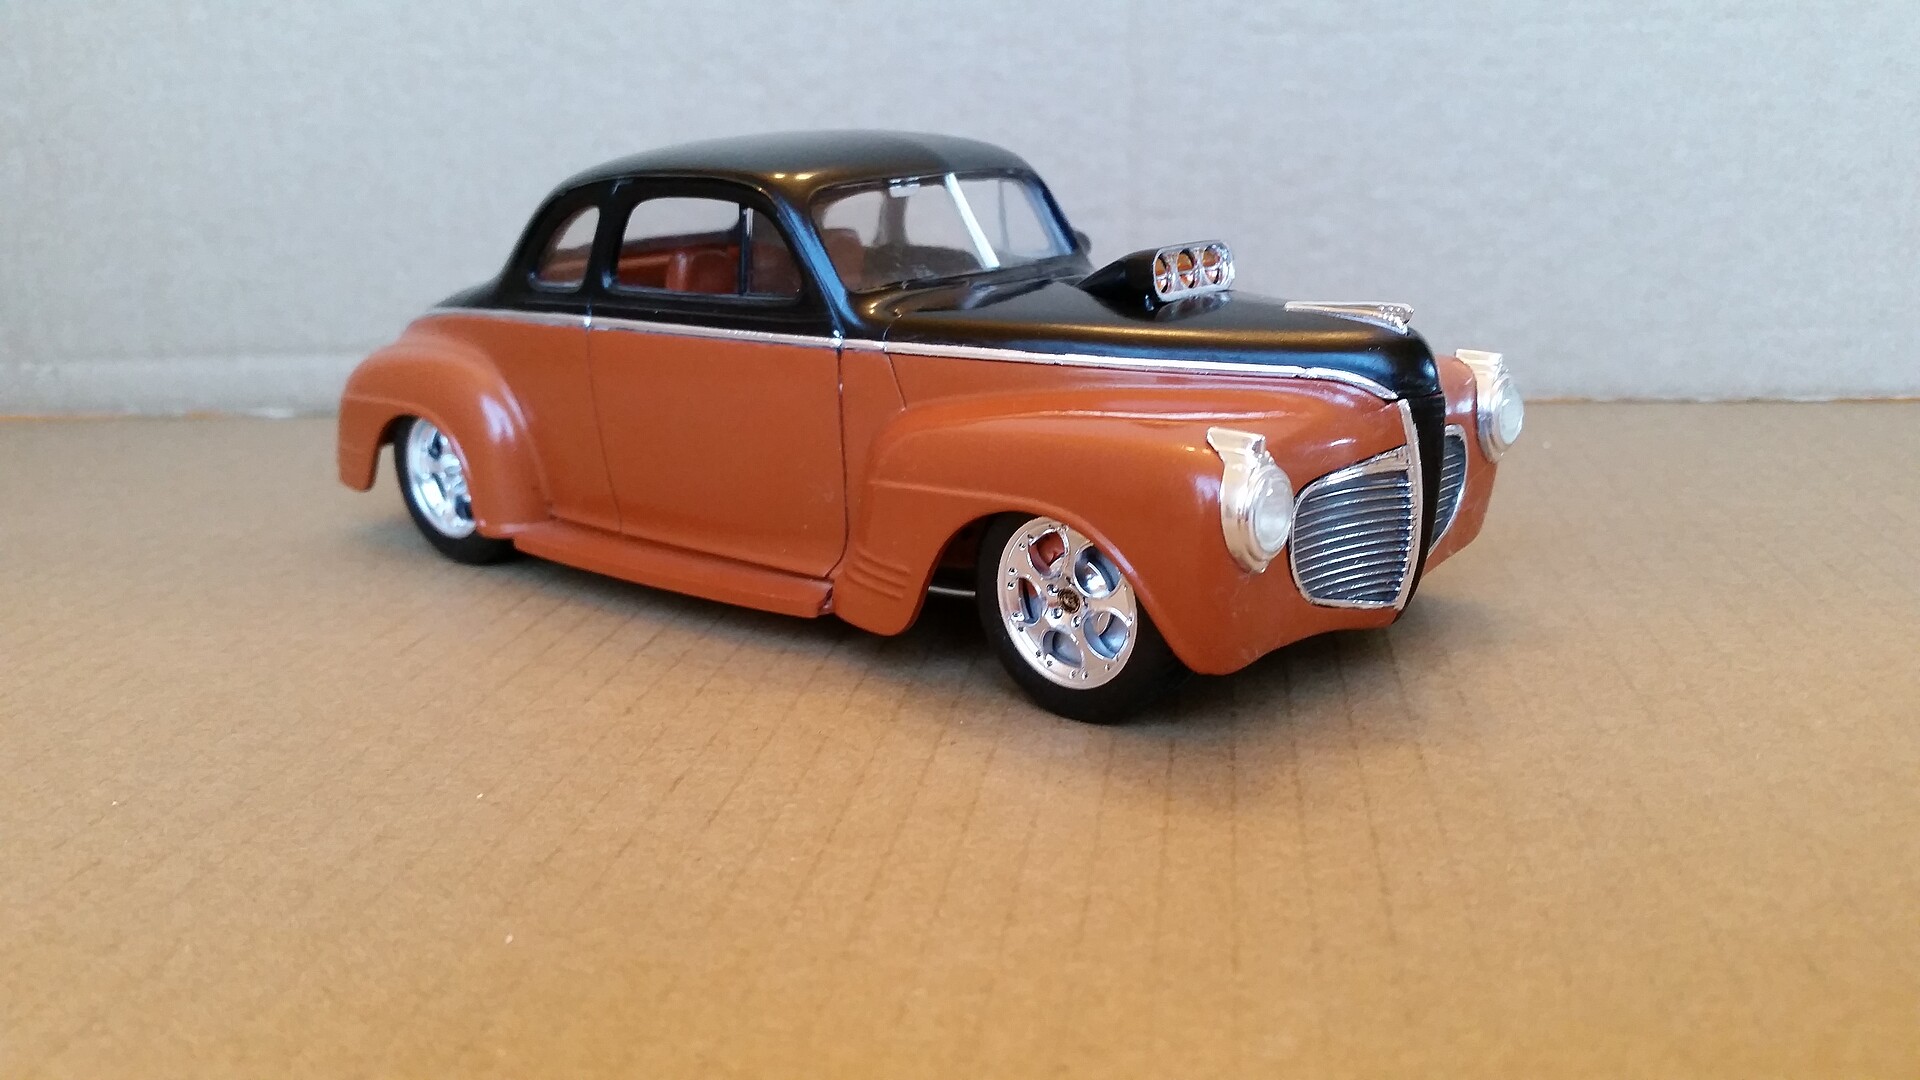 1941 Plymouth Coupe Car Model Kit